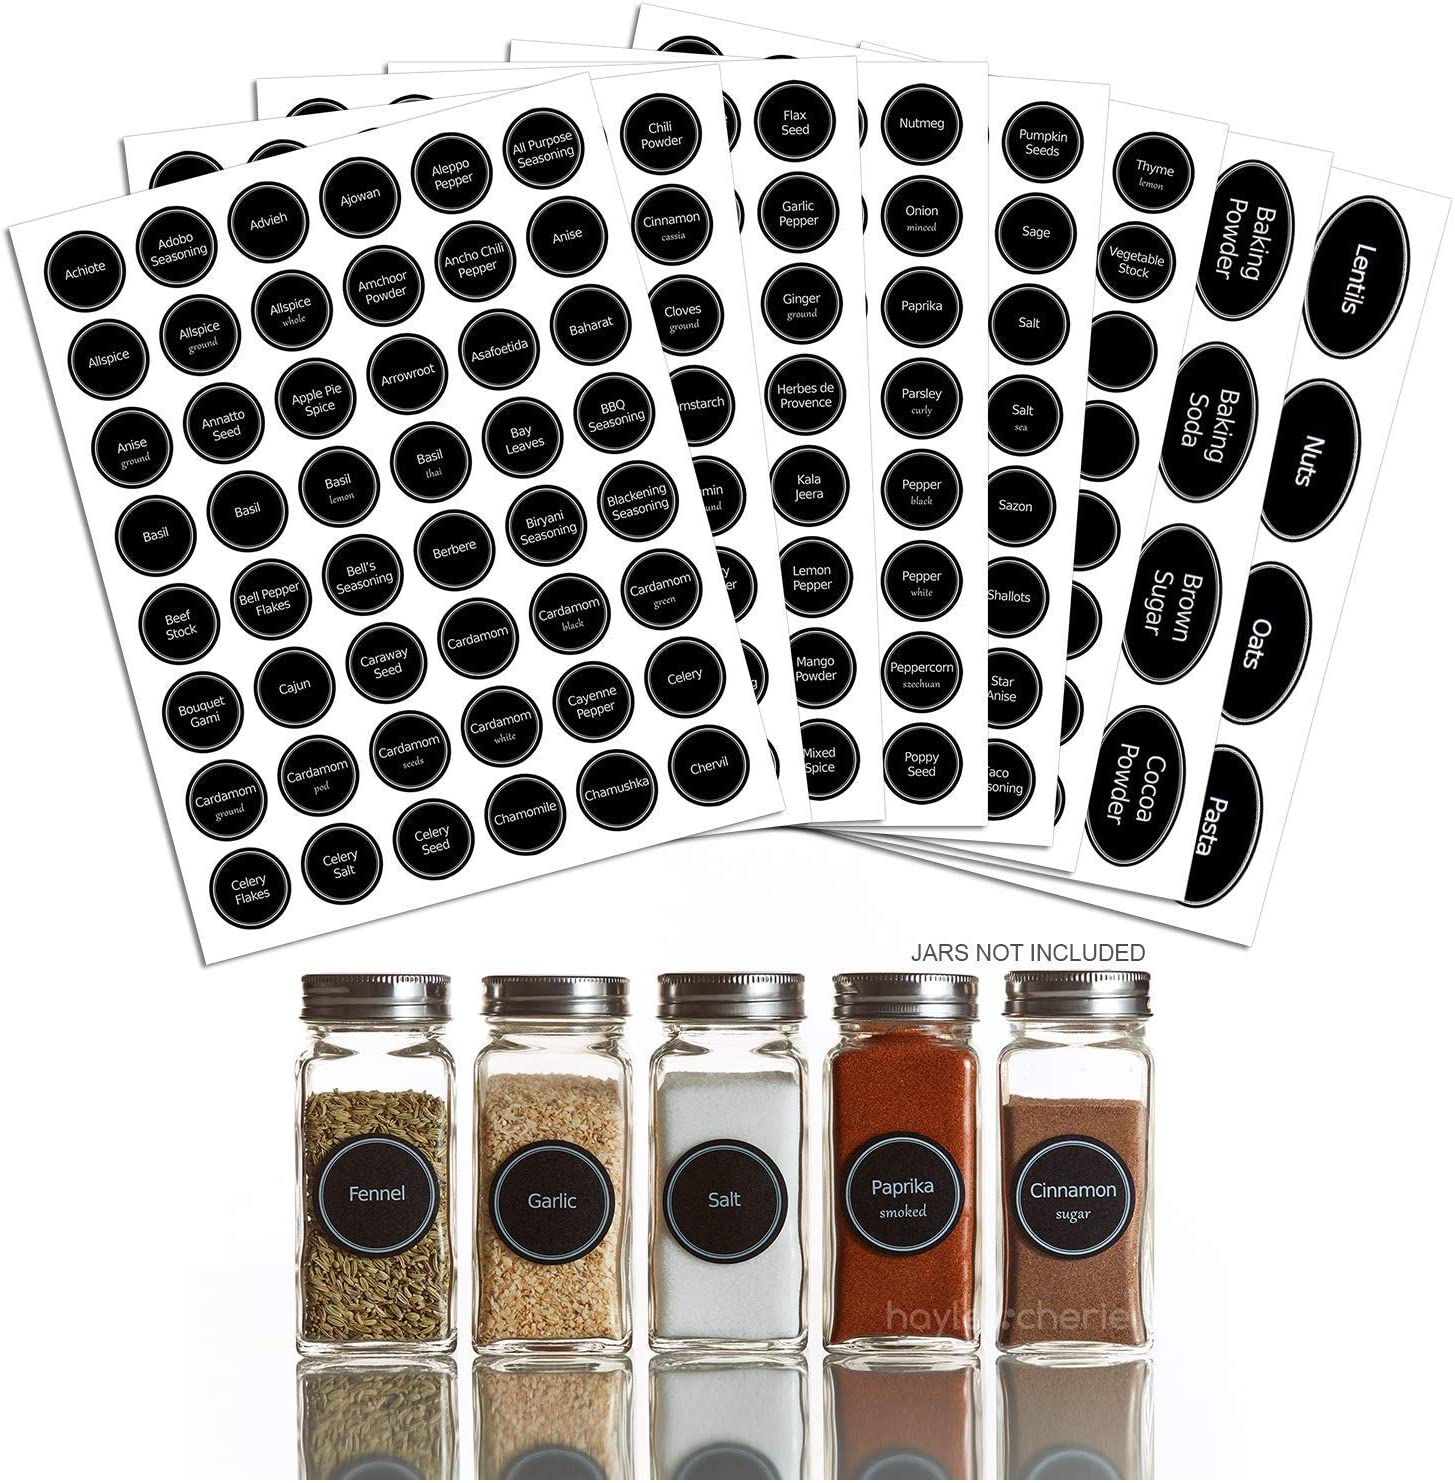 Nellam French Round Glass Spice Jars – Set of 24 with Shaker Lids